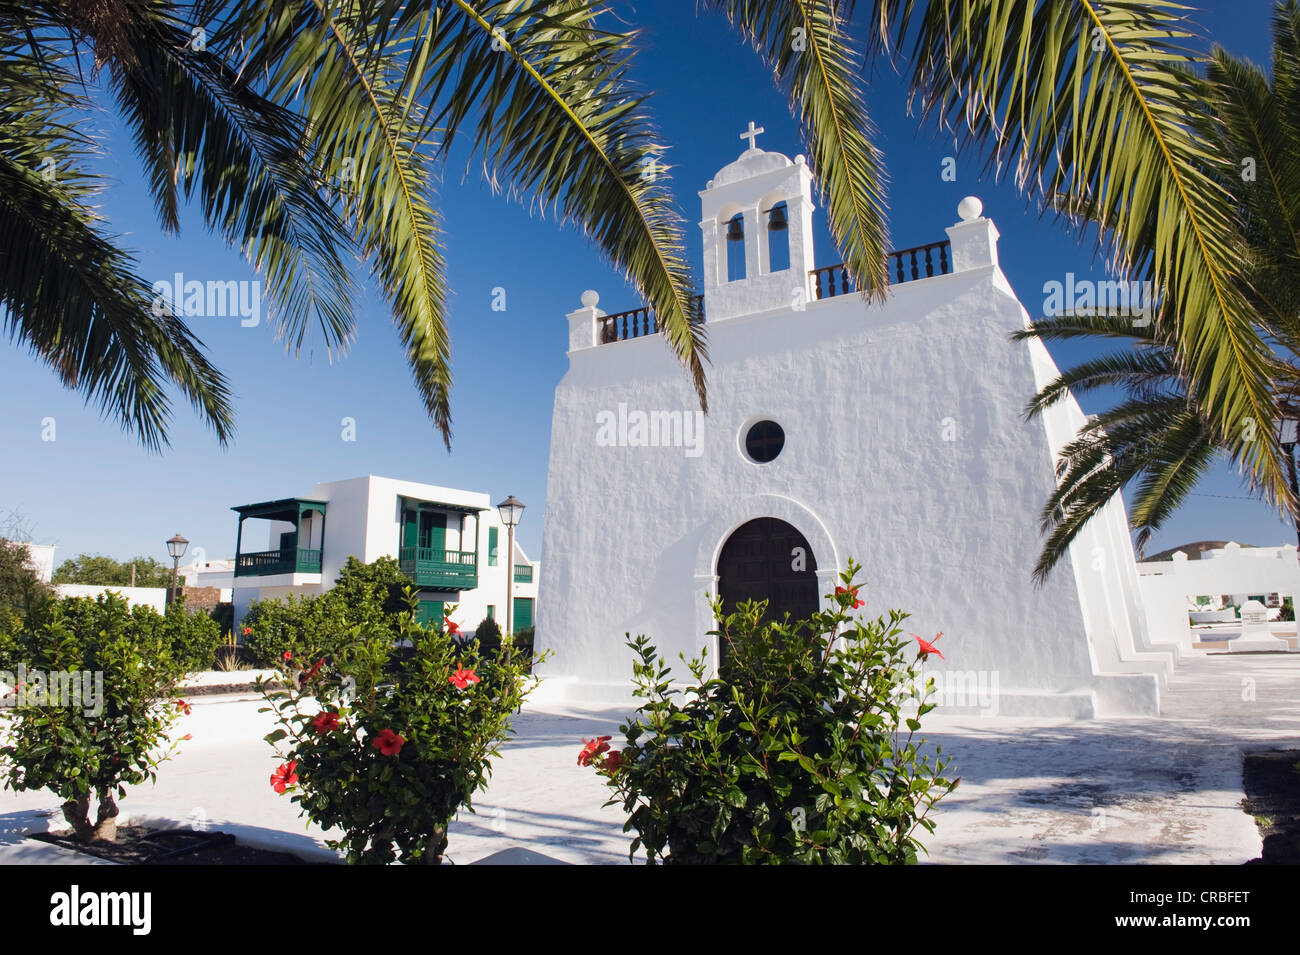 Church and palm trees, Uga, Lanzarote, Canary Islands, Spain, Europe Stock Photo